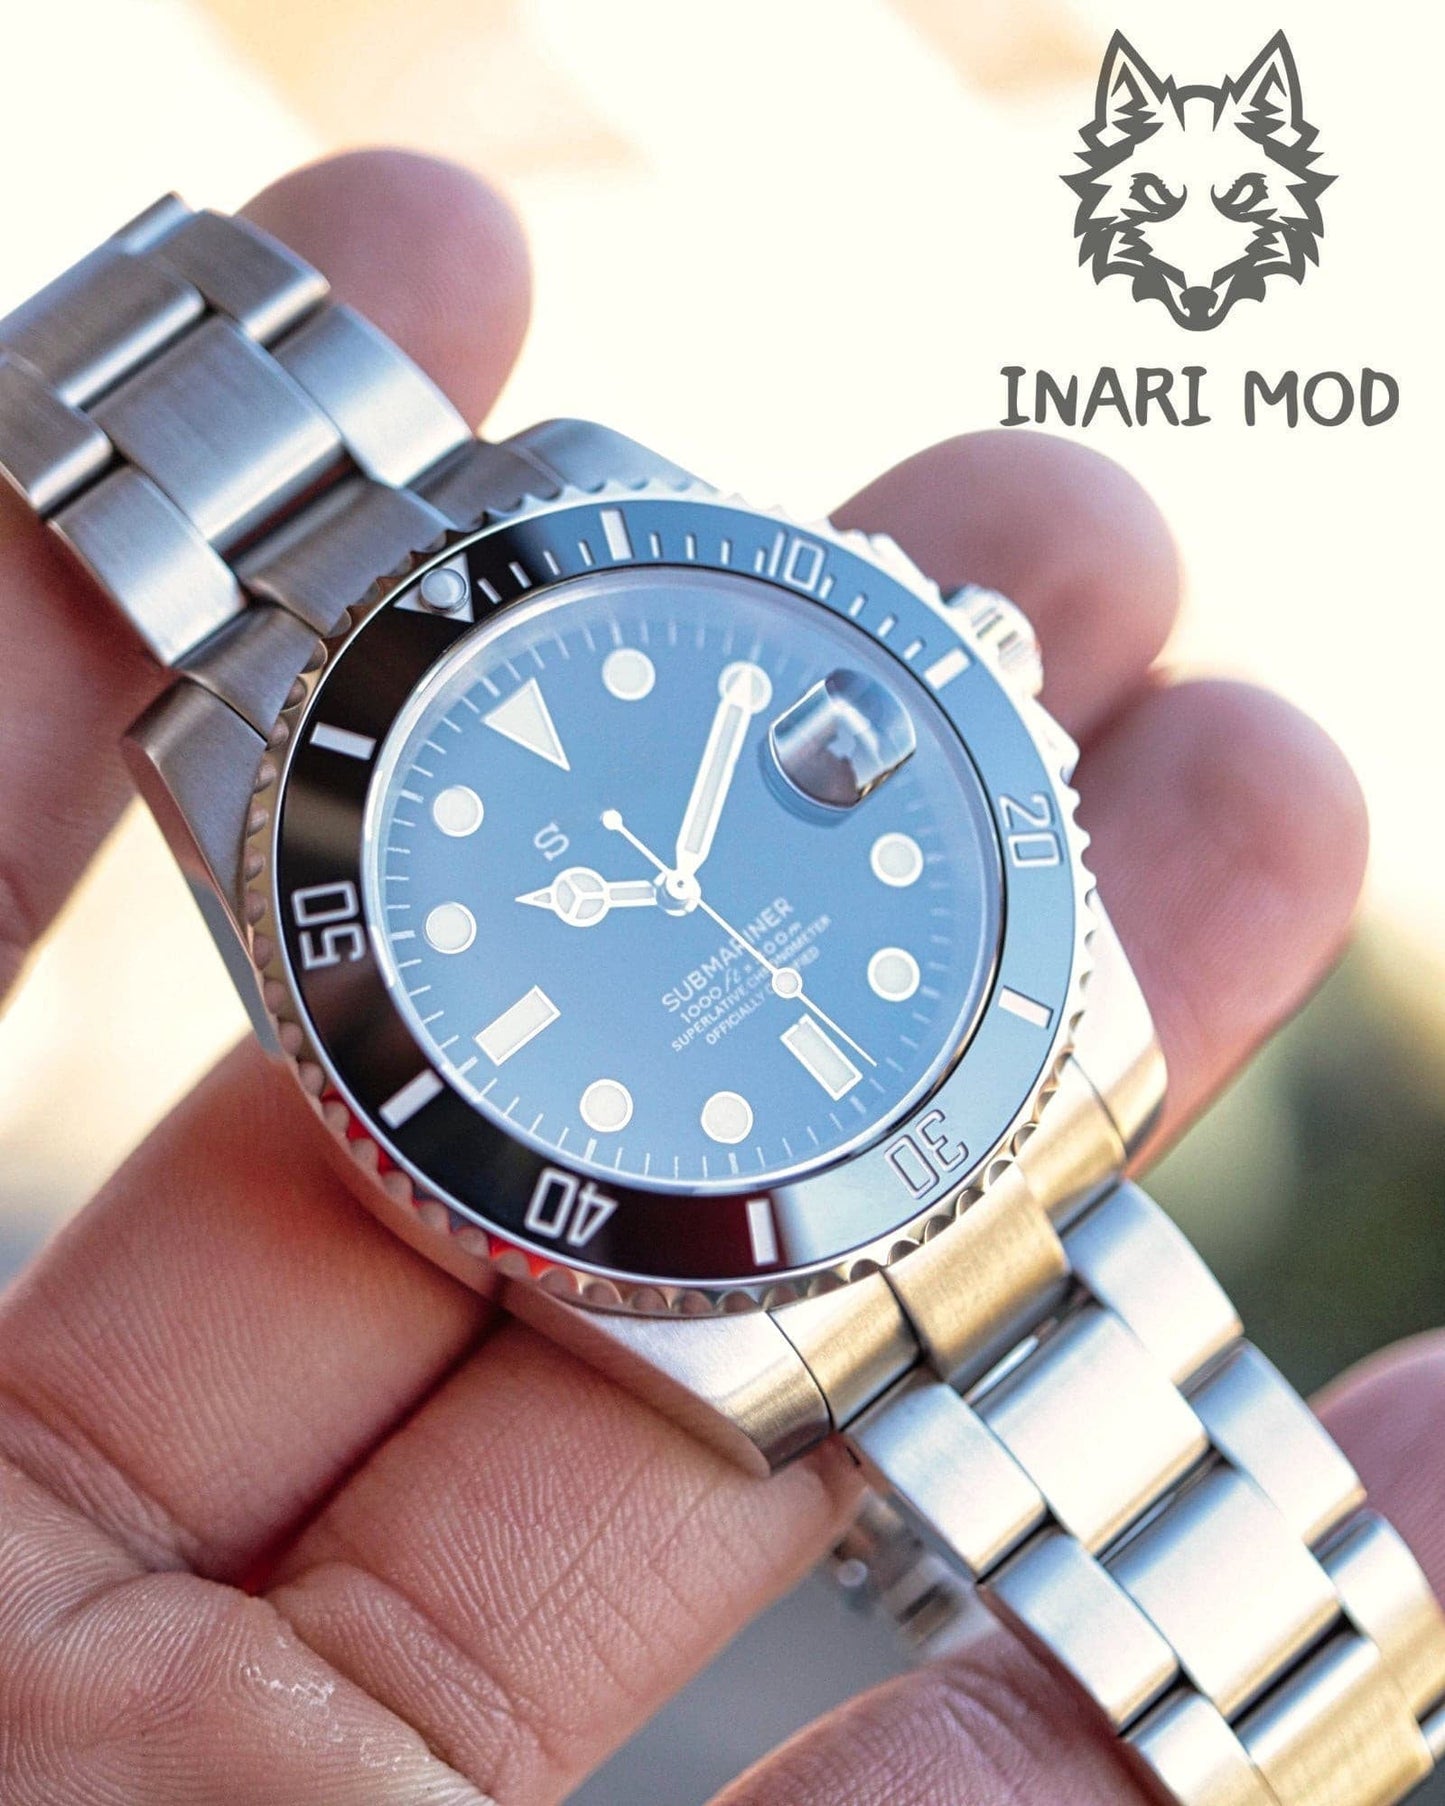 Seiko Mod Submariner from Inarimod for 299.90